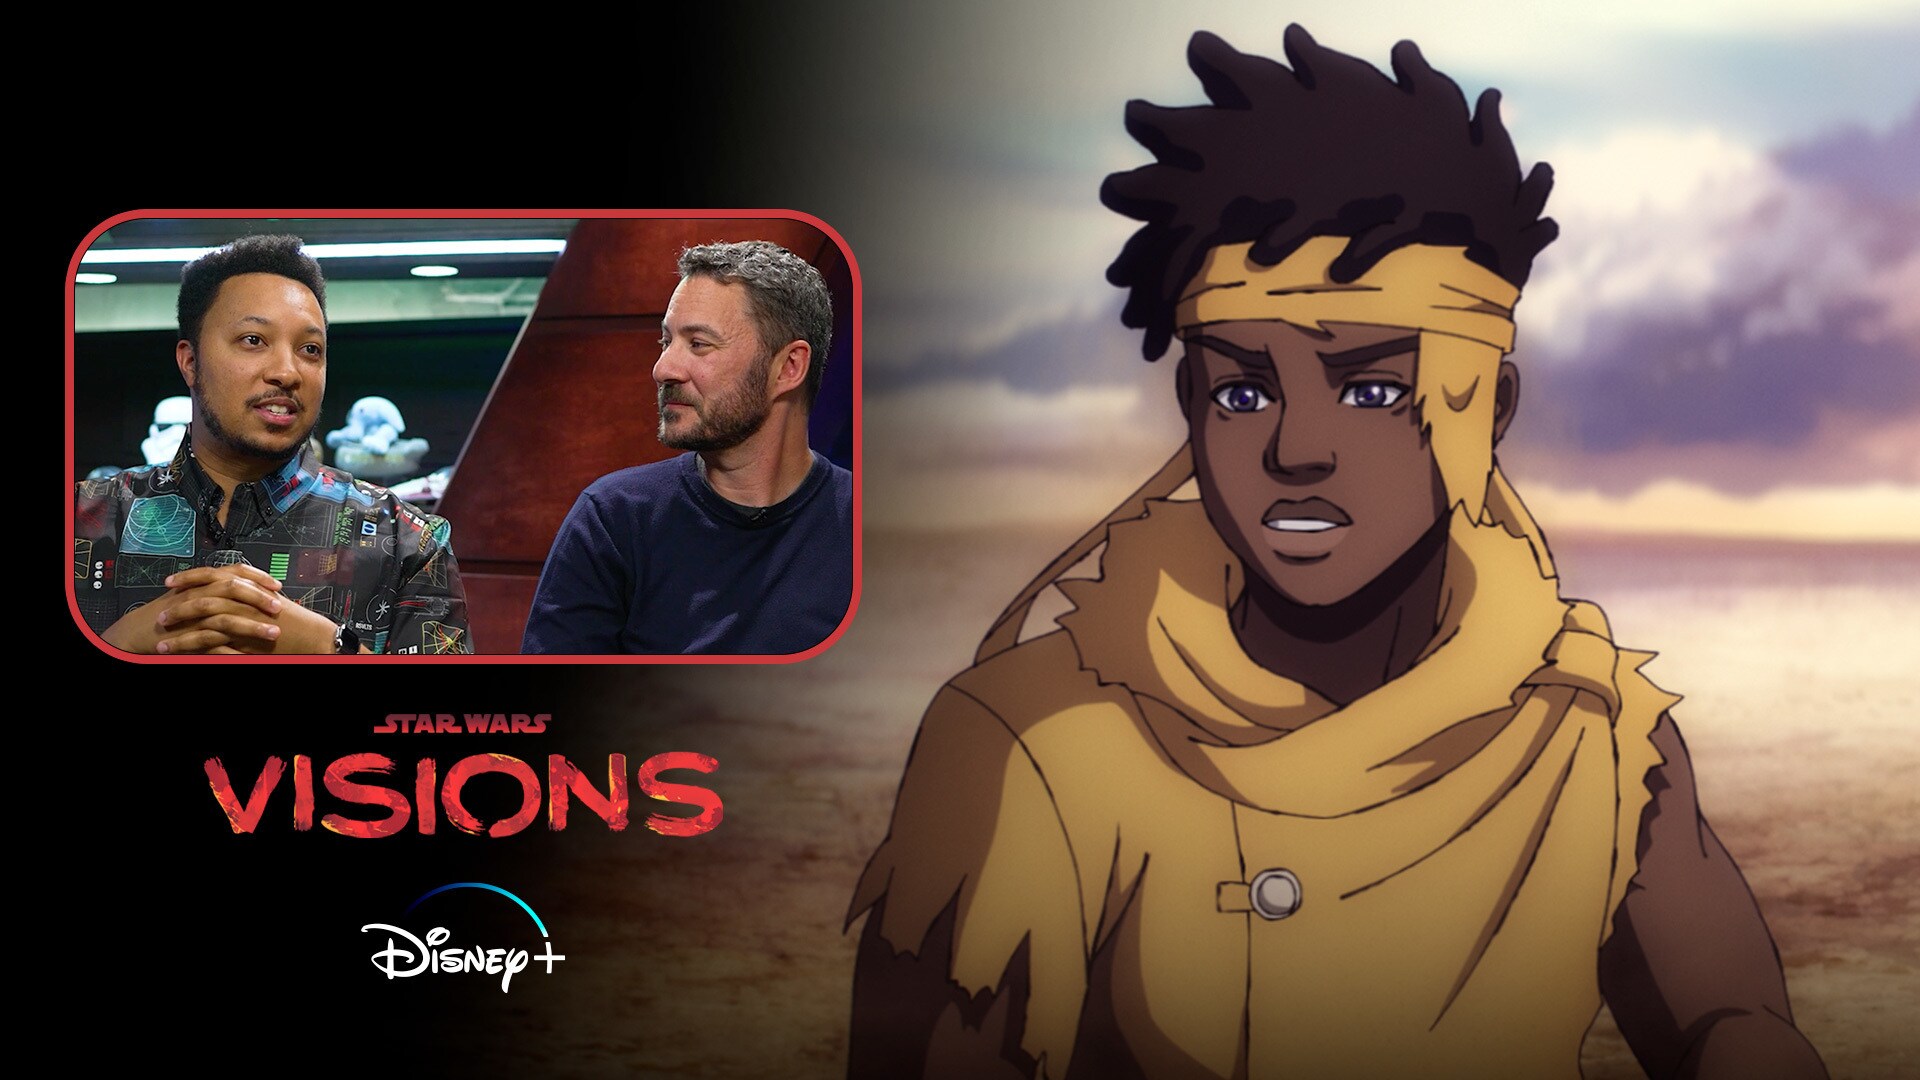 Directors LeAndre Thomas and Justin Ridge on "The Pit" | Star Wars: Visions Volume 2